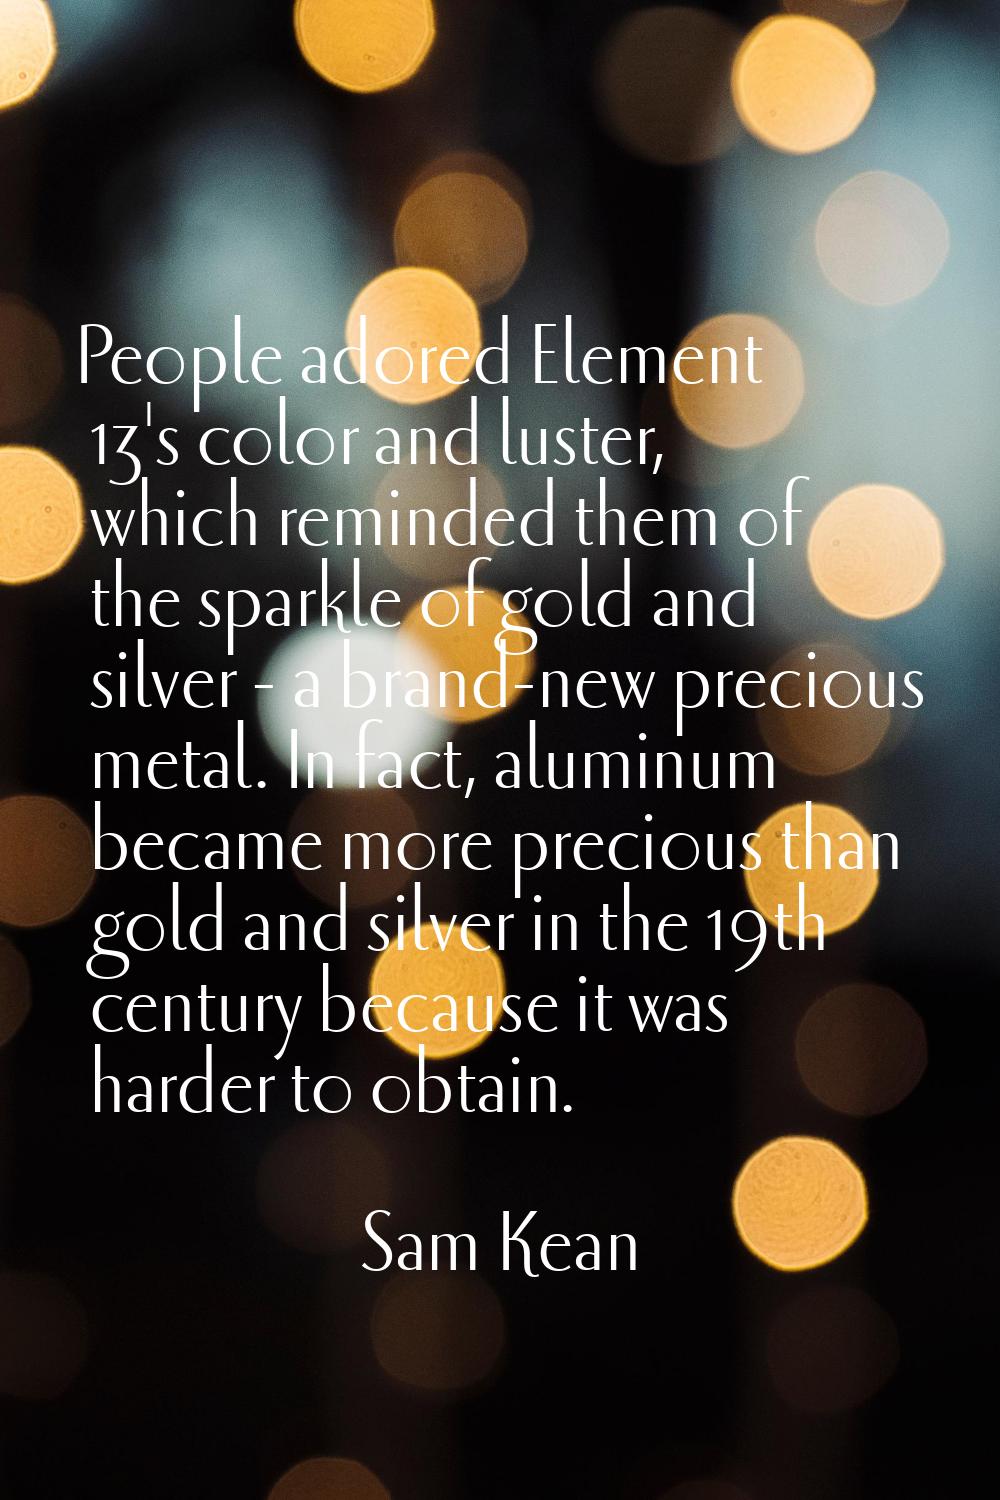 People adored Element 13's color and luster, which reminded them of the sparkle of gold and silver 